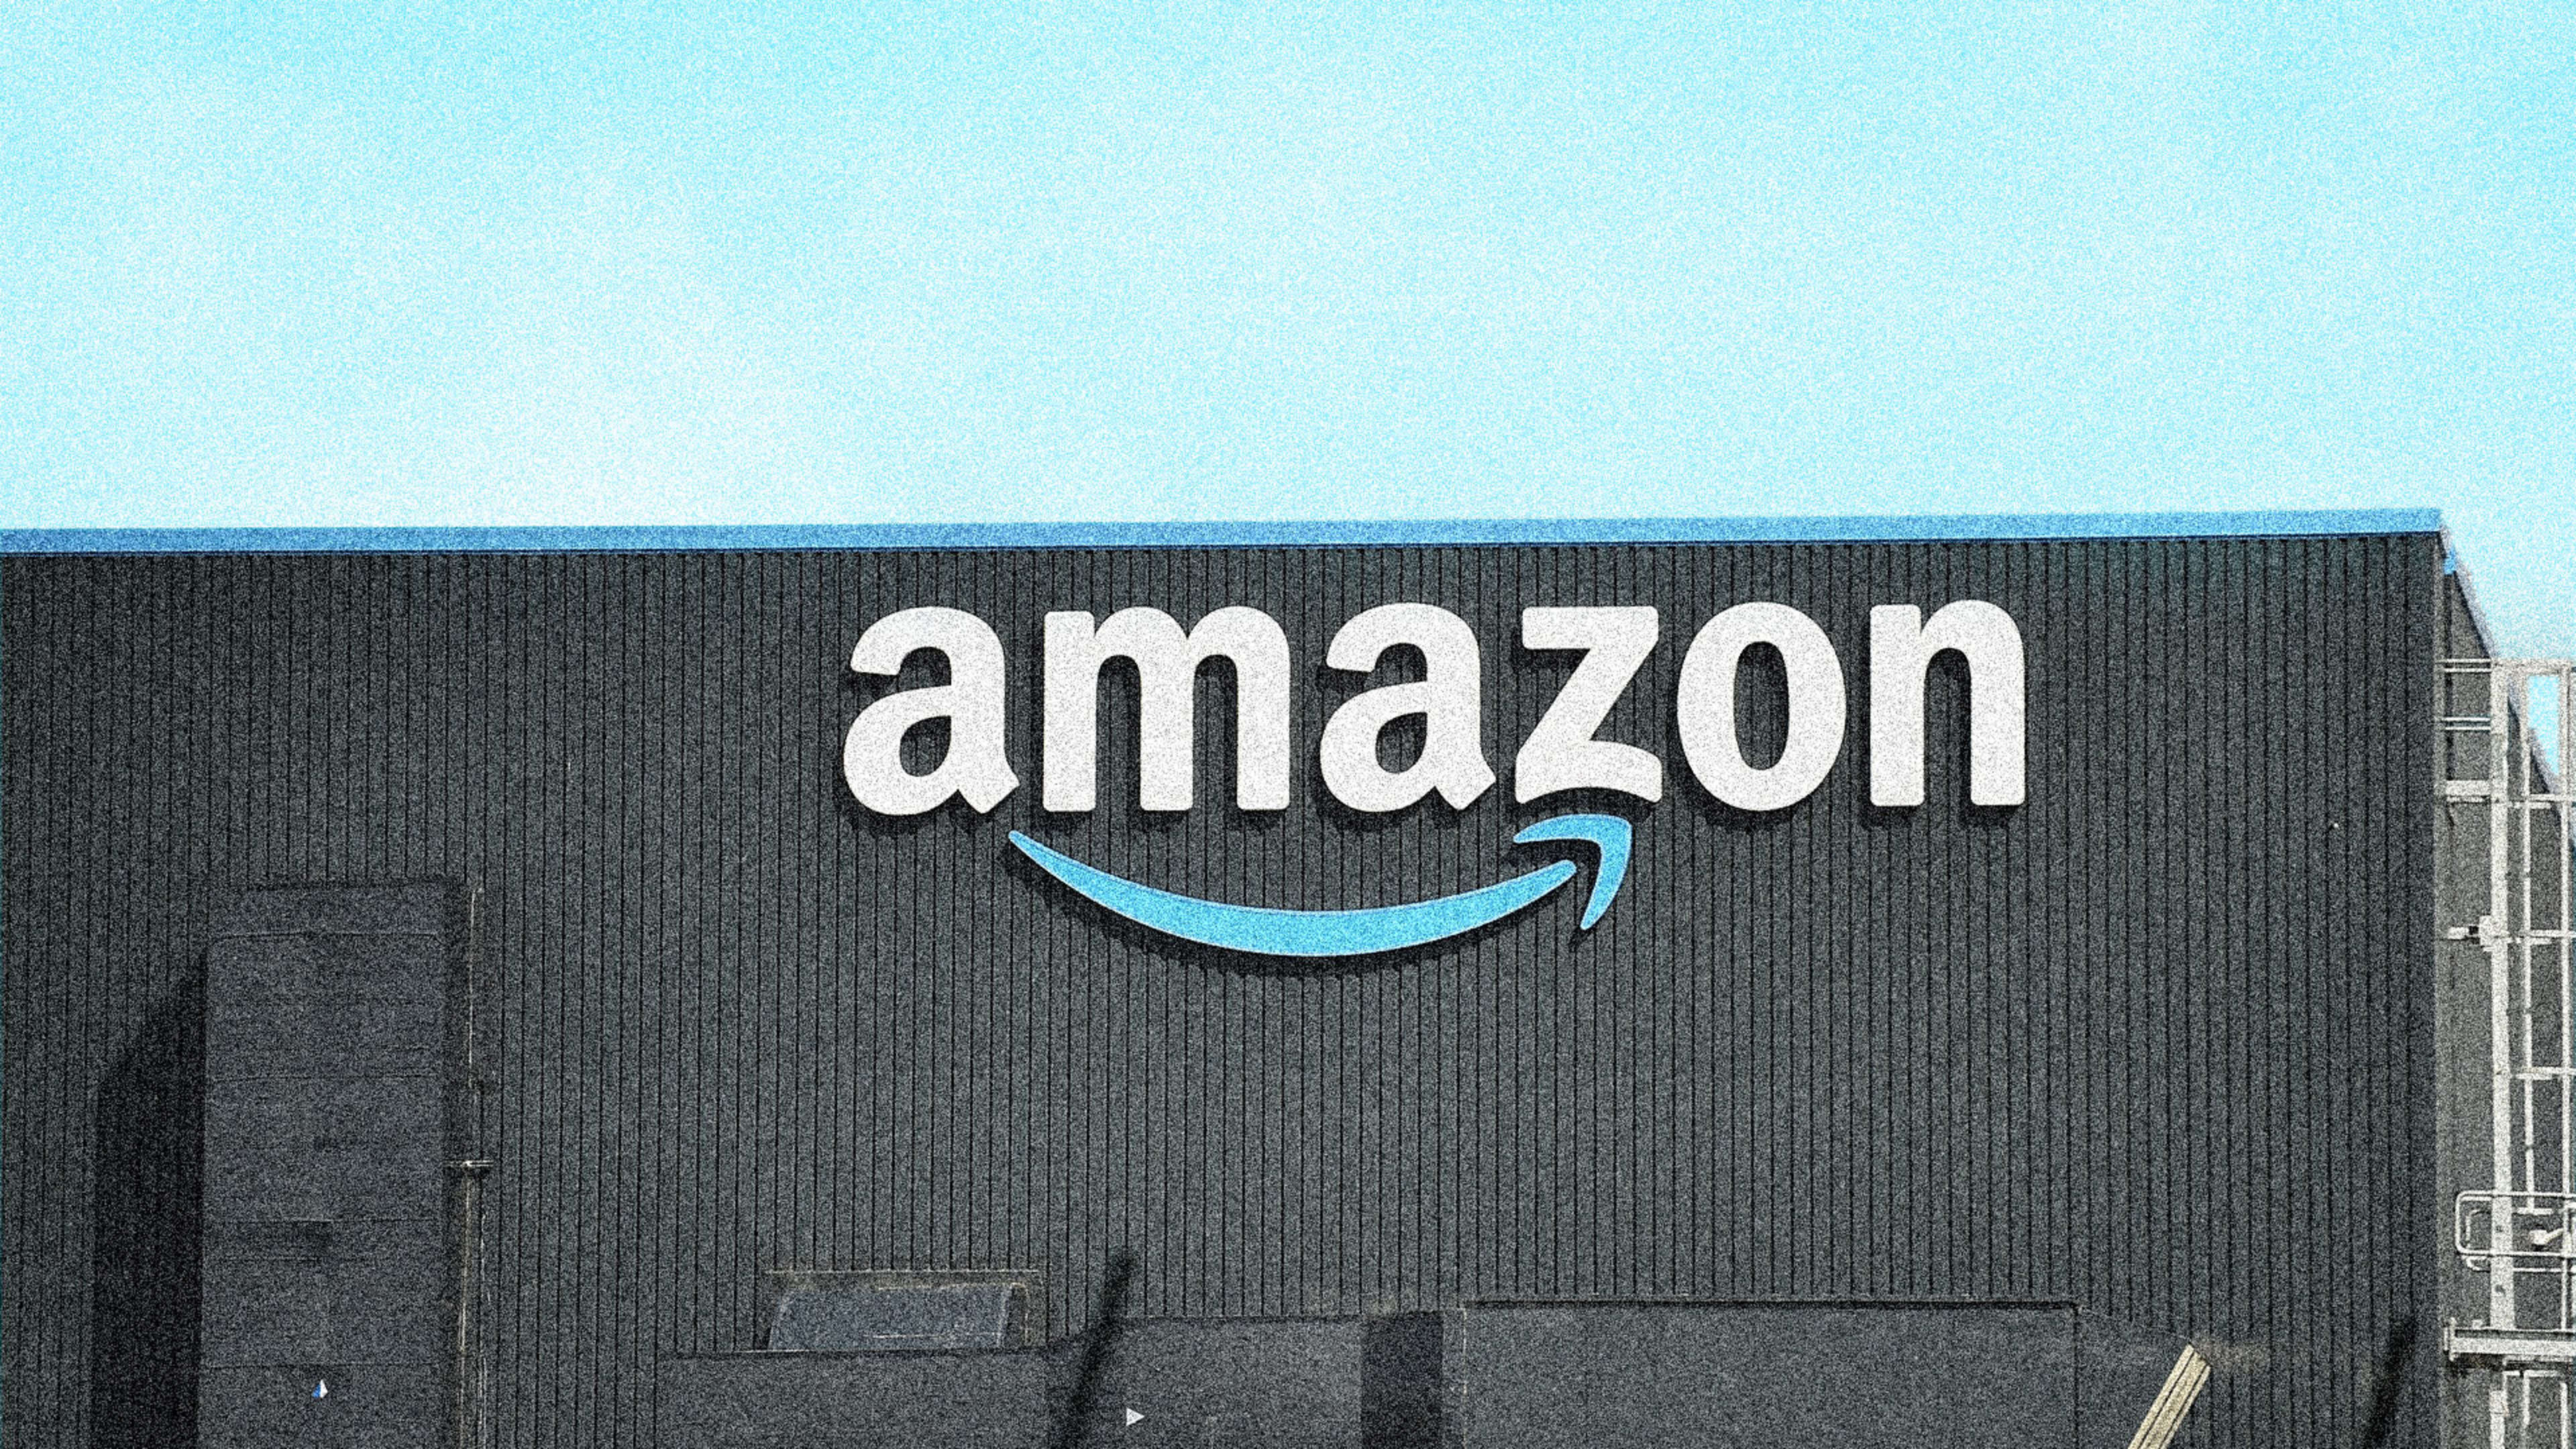 Amazon ditches controversial ‘ambassador’ program that used warehouse workers on Twitter